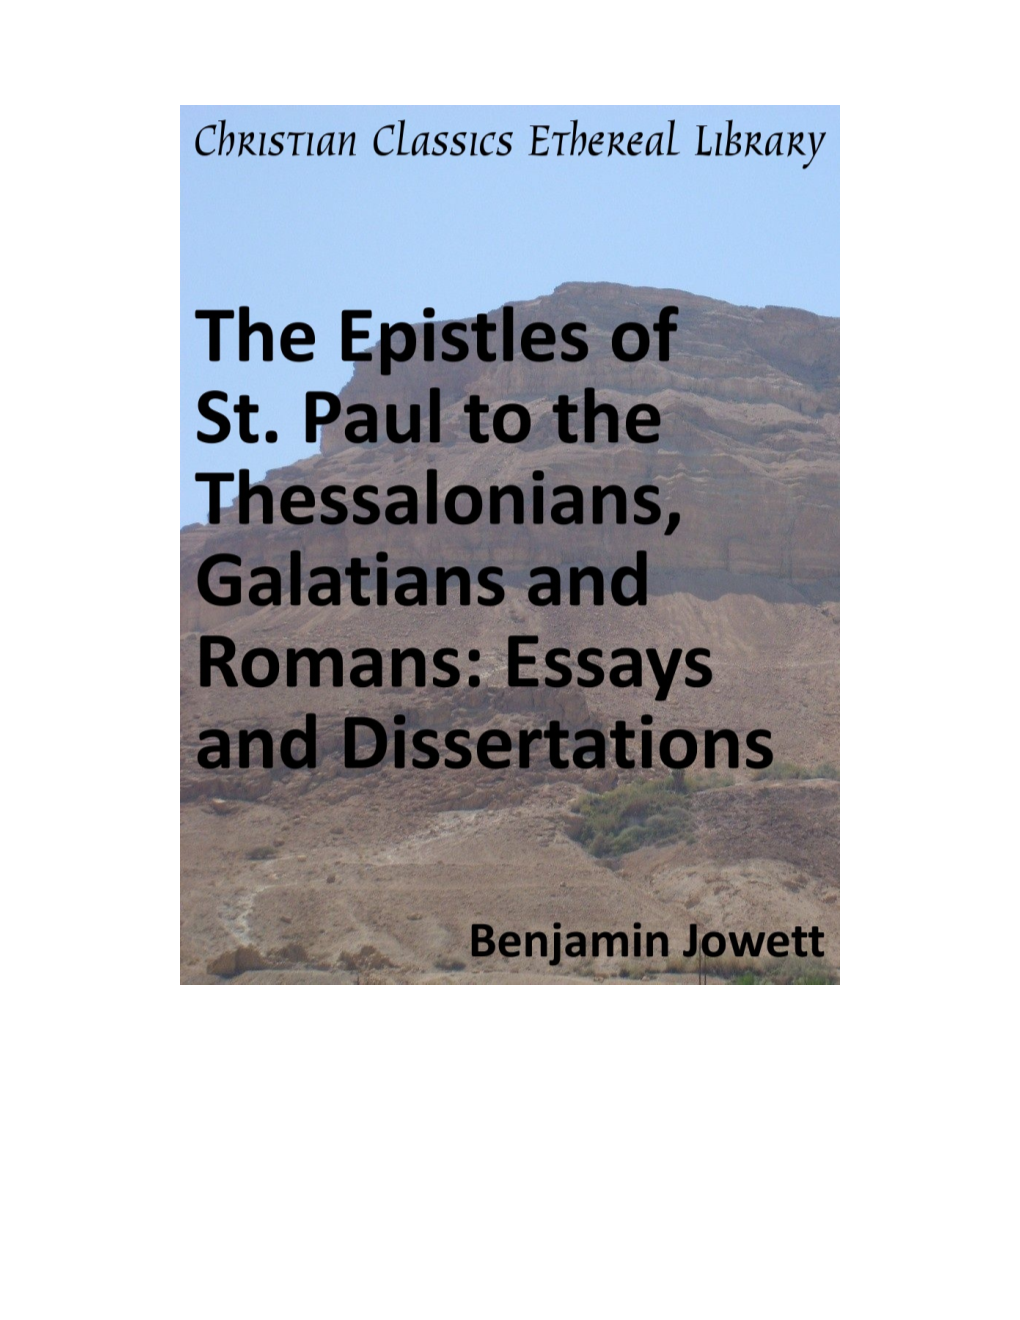 The Epistles of St. Paul to the Thessalonians, Galatians and Romans: Essays and Dissertations